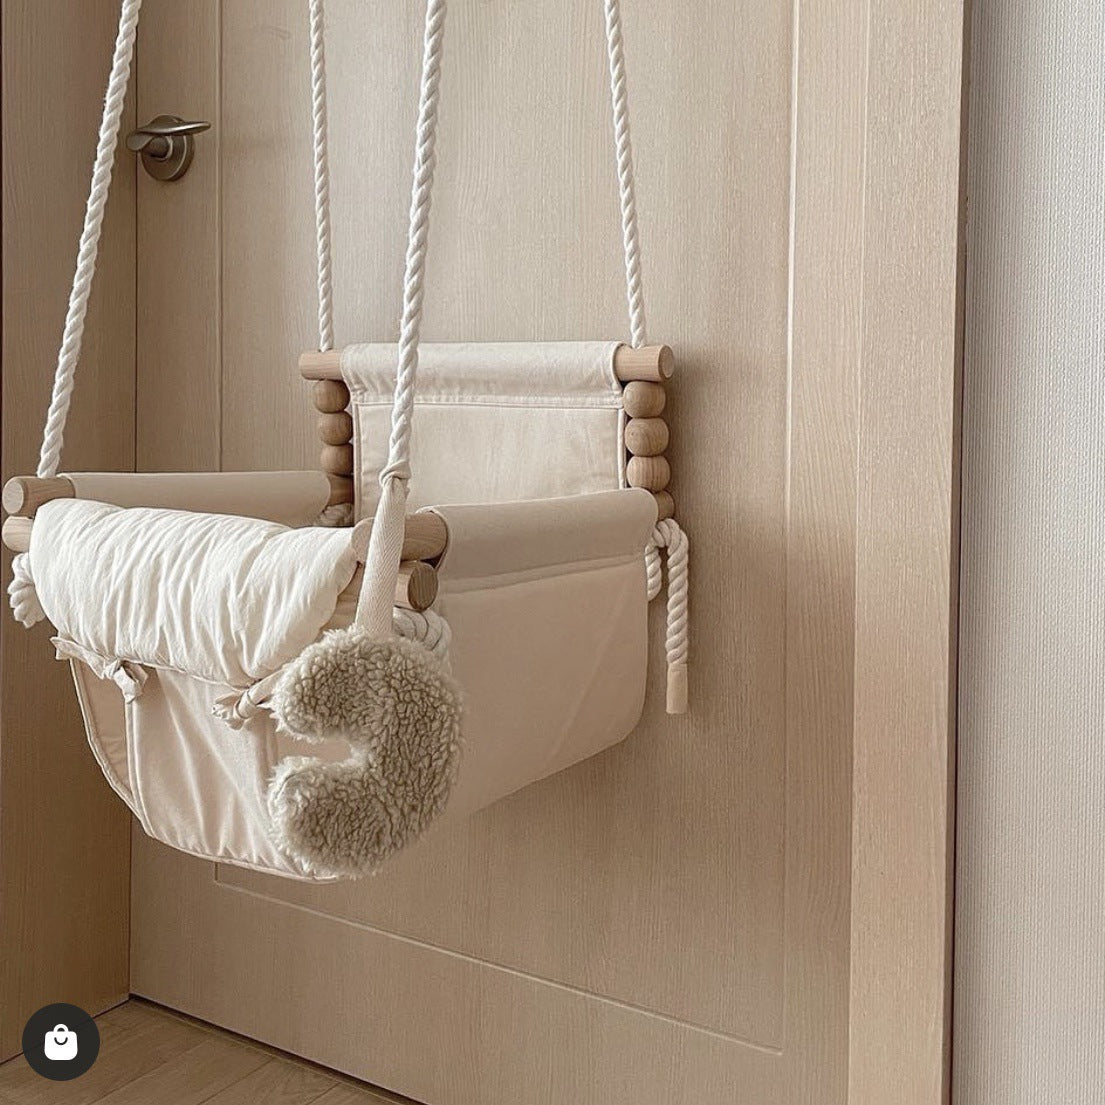 Create Magical Moments with Baby Cotton Indoor Swing: Snuggly and Fun